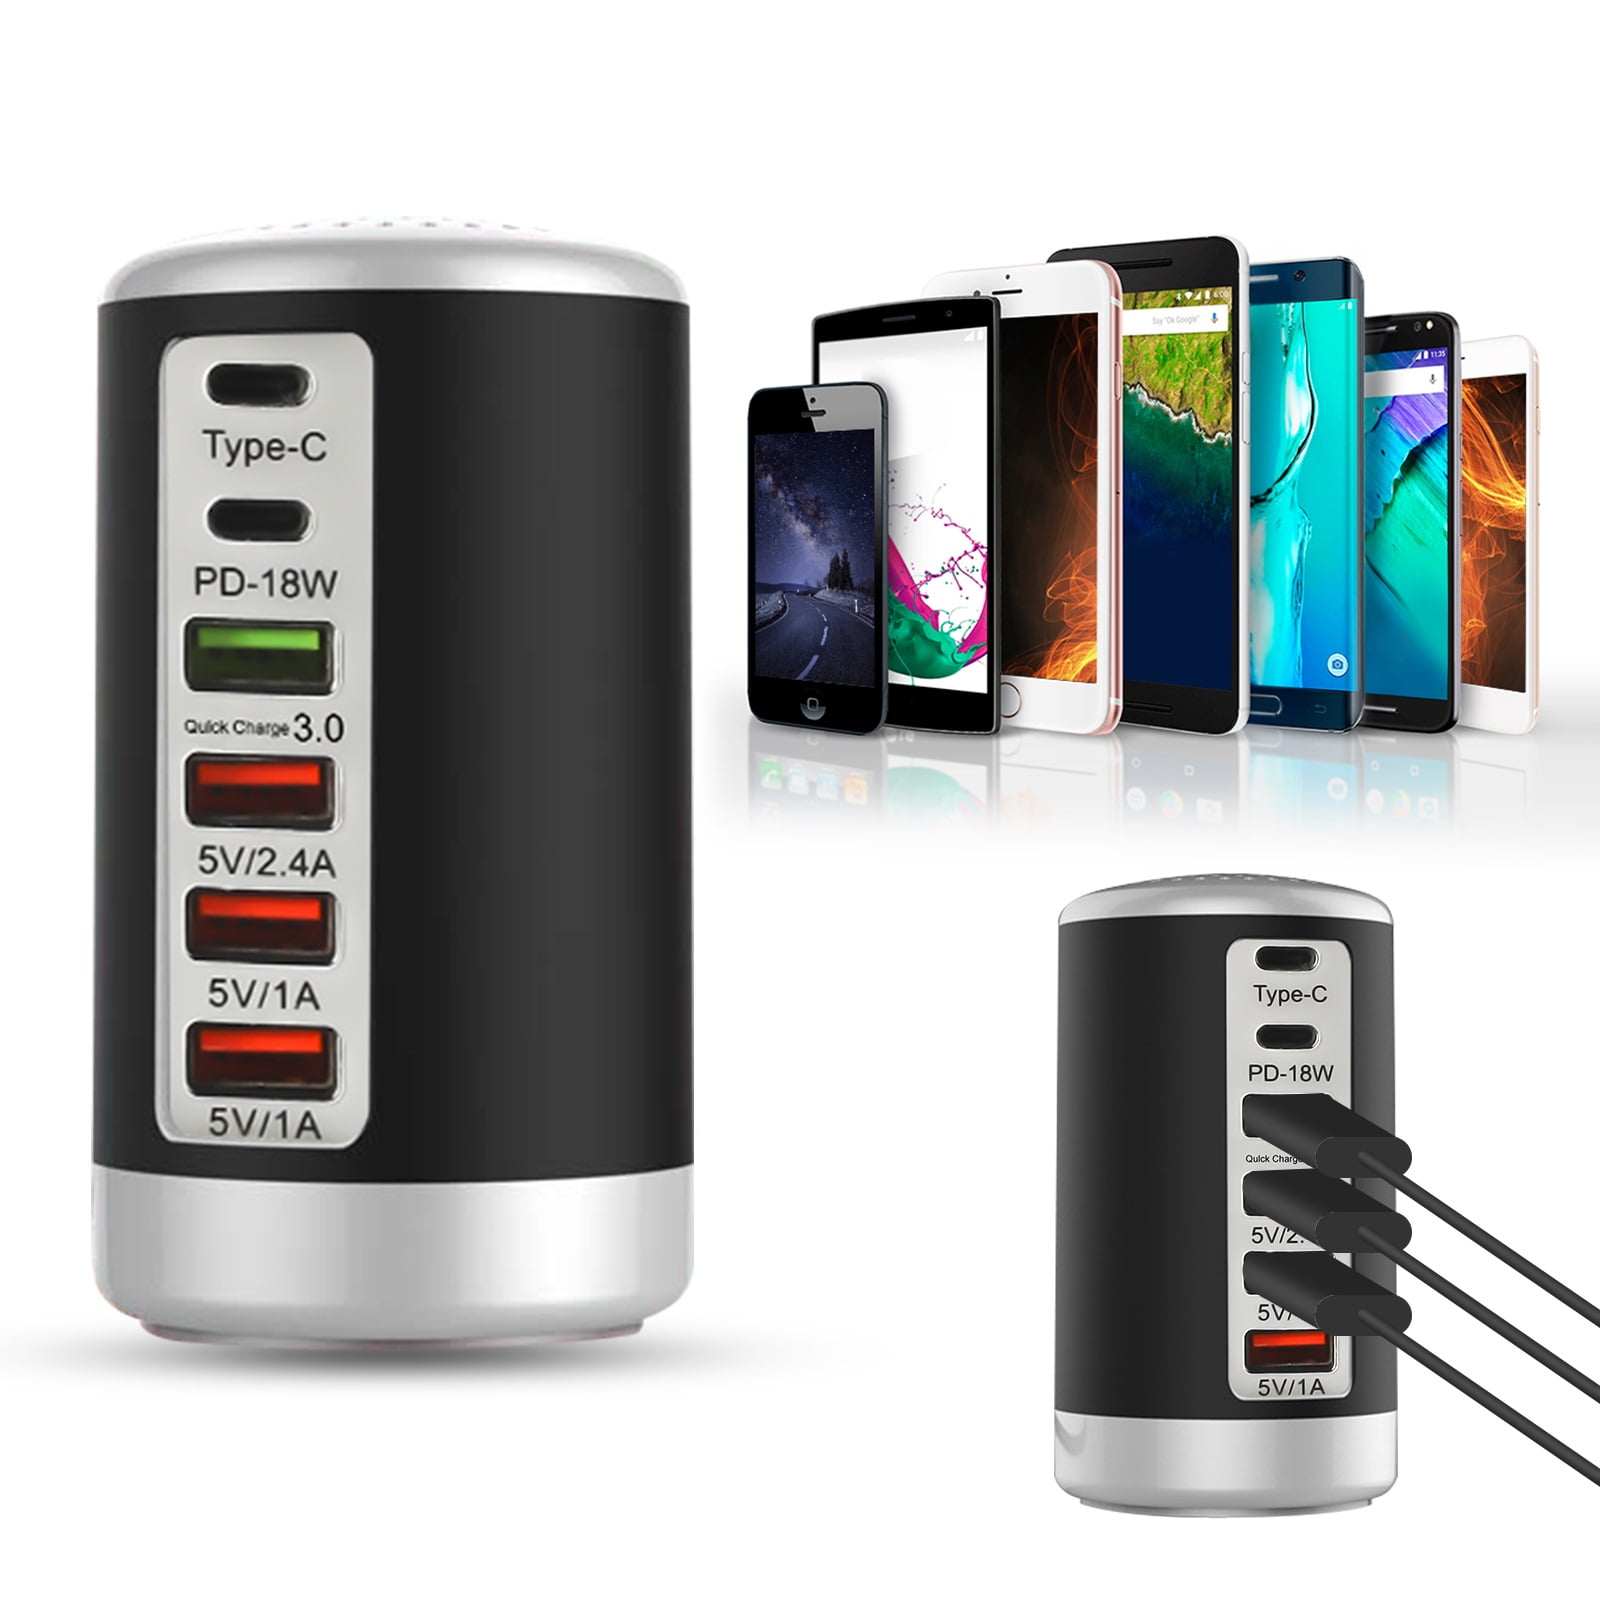 ICH-45SA600-HY Seenda 60W 12A 6-Port USB Car Charger with Smart Identification for iPhone X/8/7/6 Car Charger Galaxy S9/S8/S7/S6/Edge/Note 5 and More USB Devices iPad Pro/Air 2/Mini 